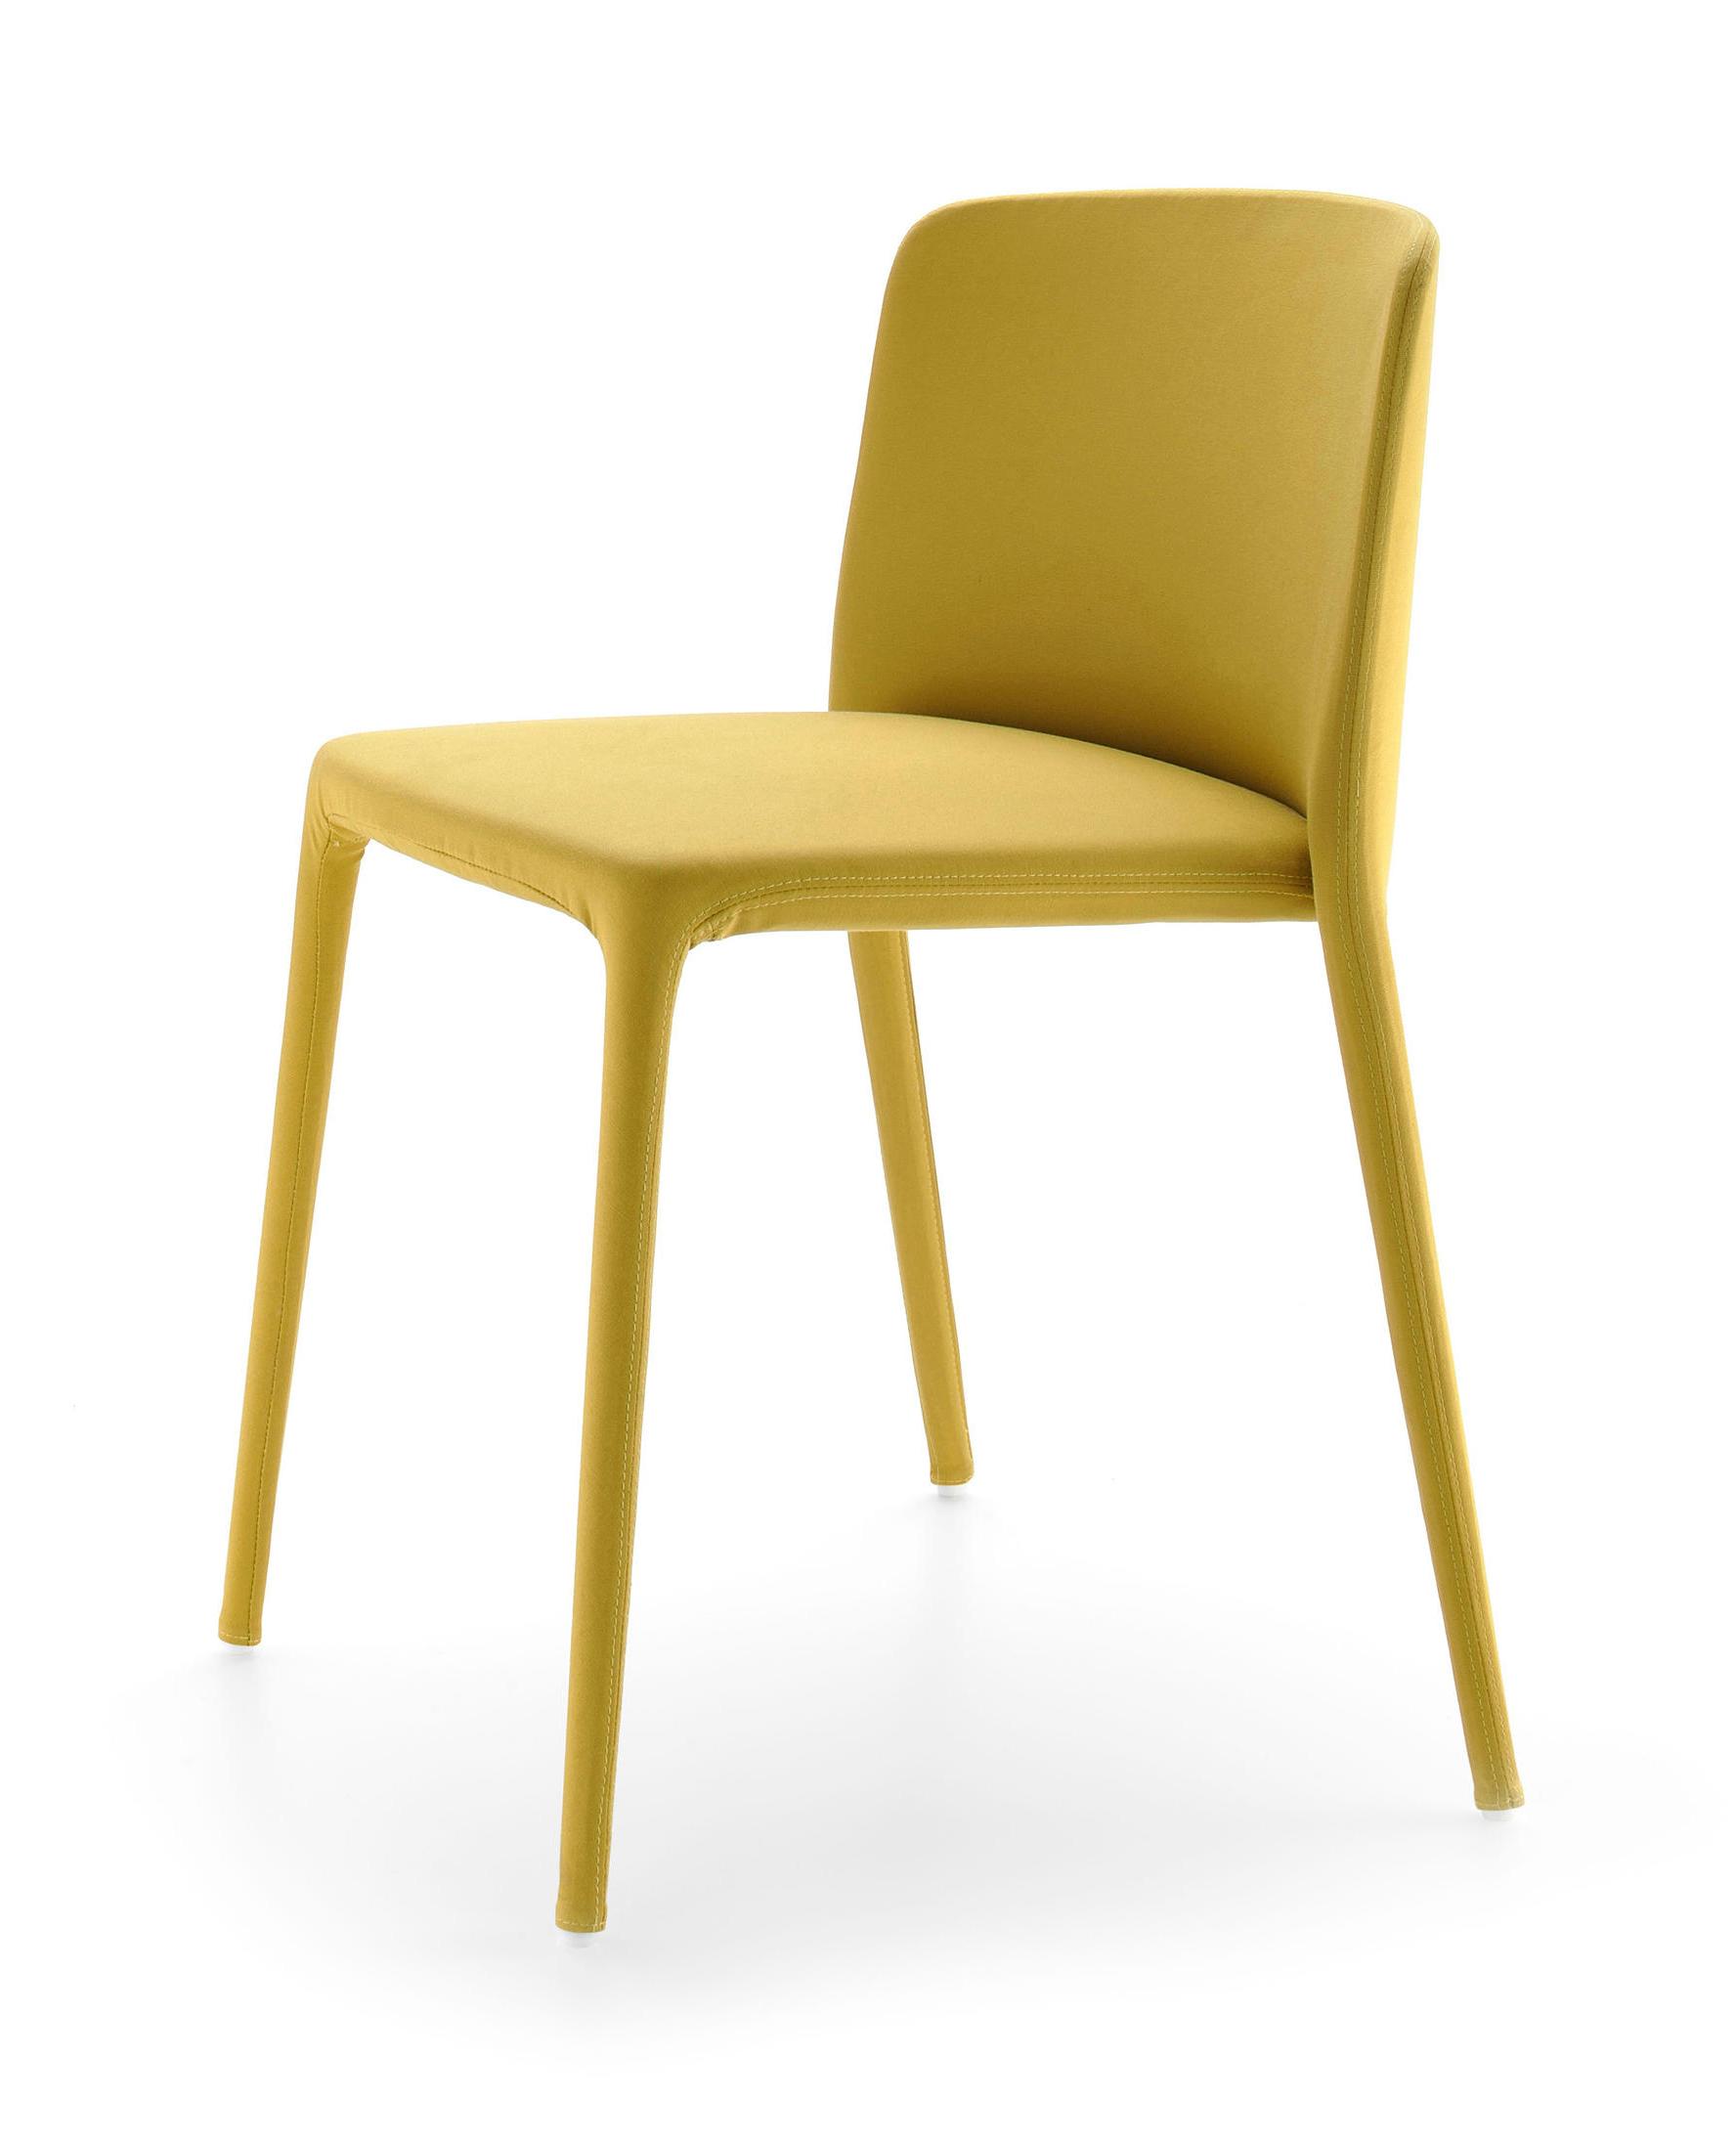 Achille Chair Crafted in Italy